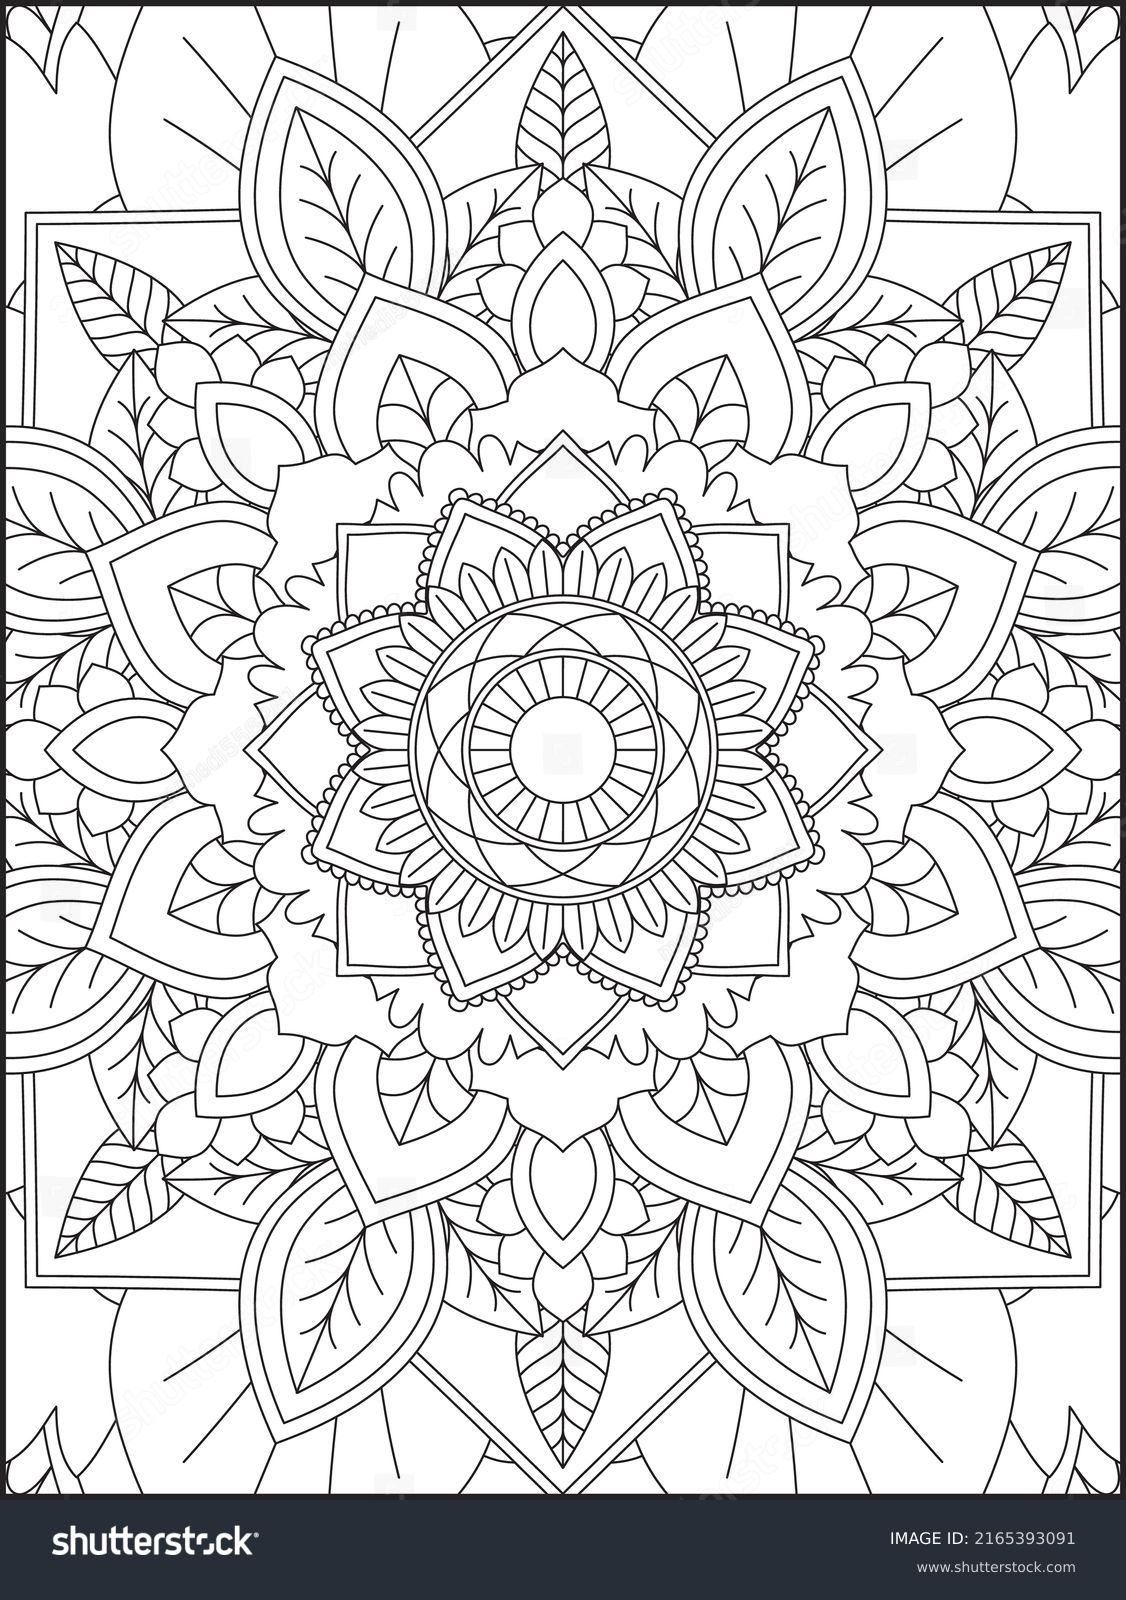 Fashion adult coloring book stock photos